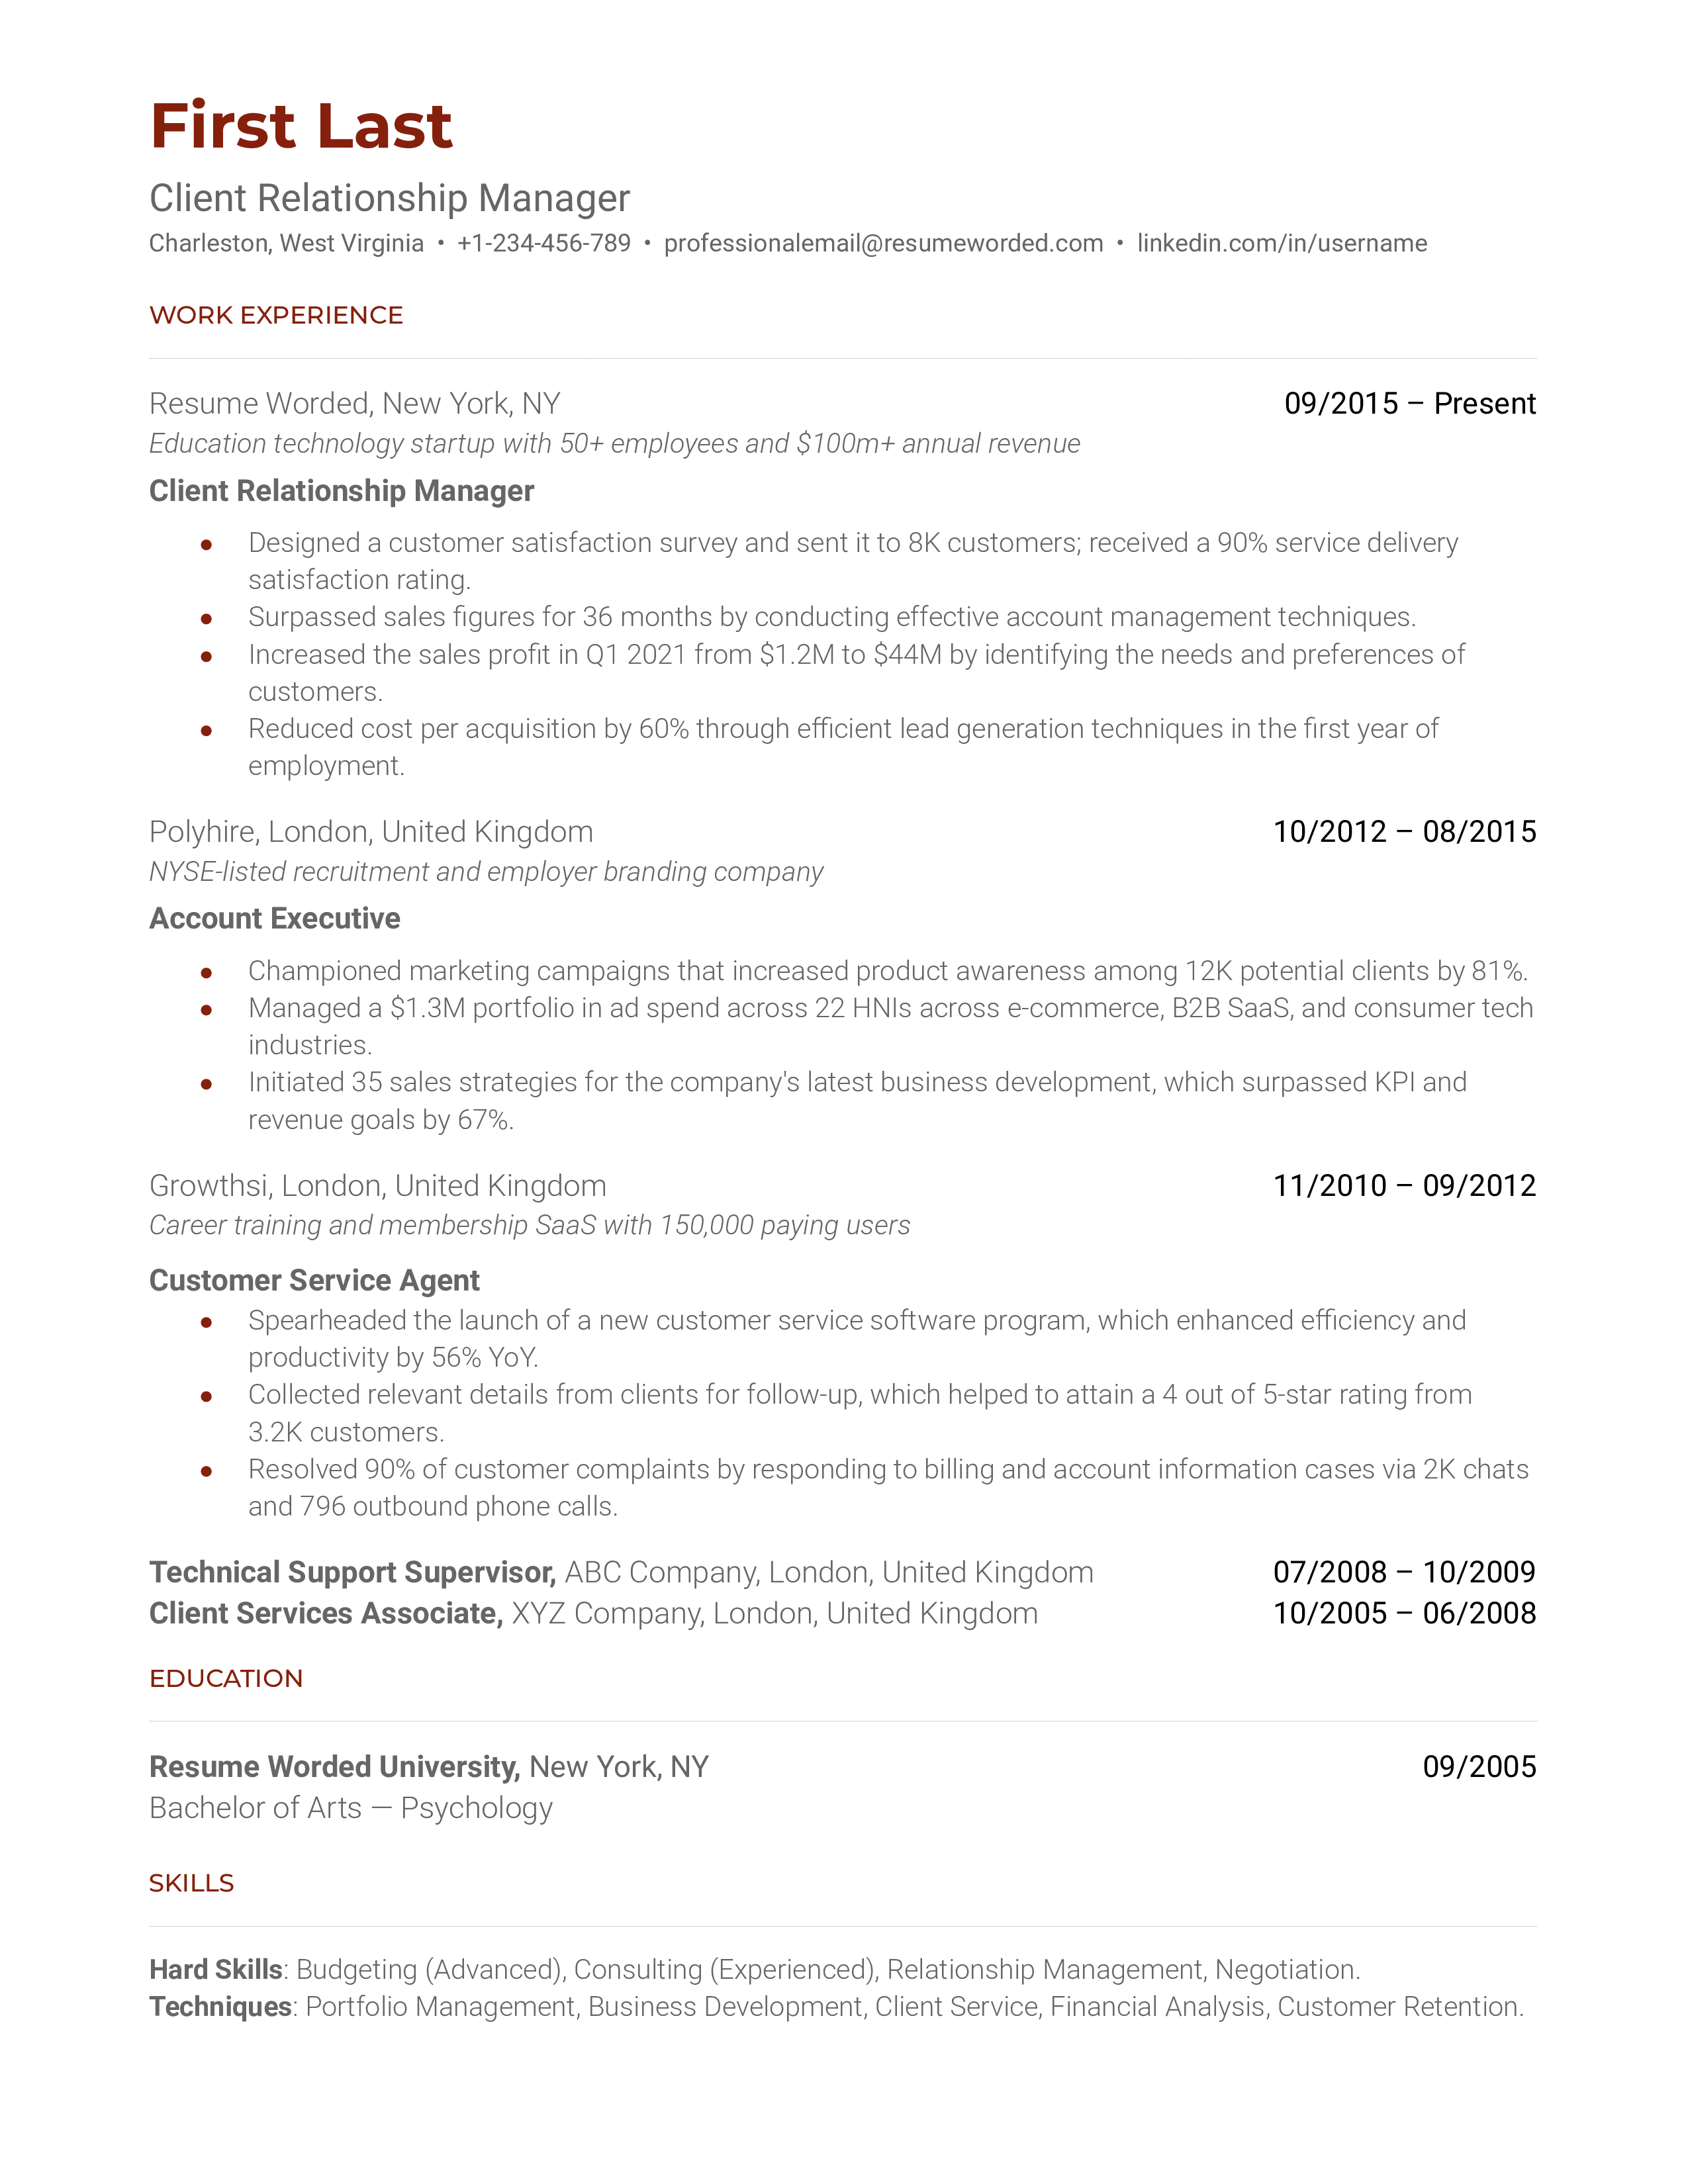 A client relationship manager resume sample that highlights the applicant’s career progression and quantifiable success.